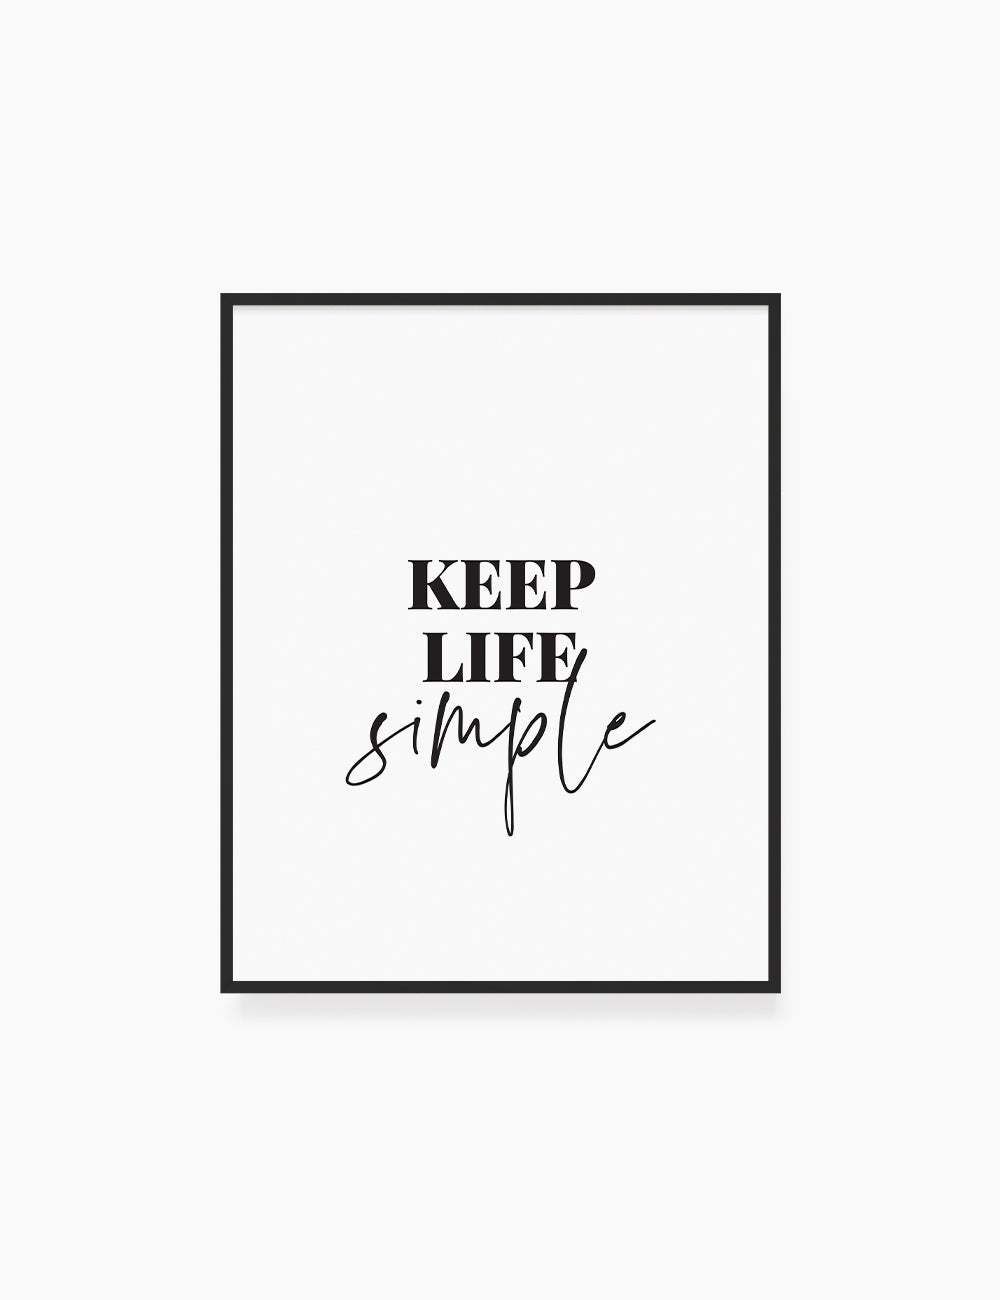 simple quotes about life